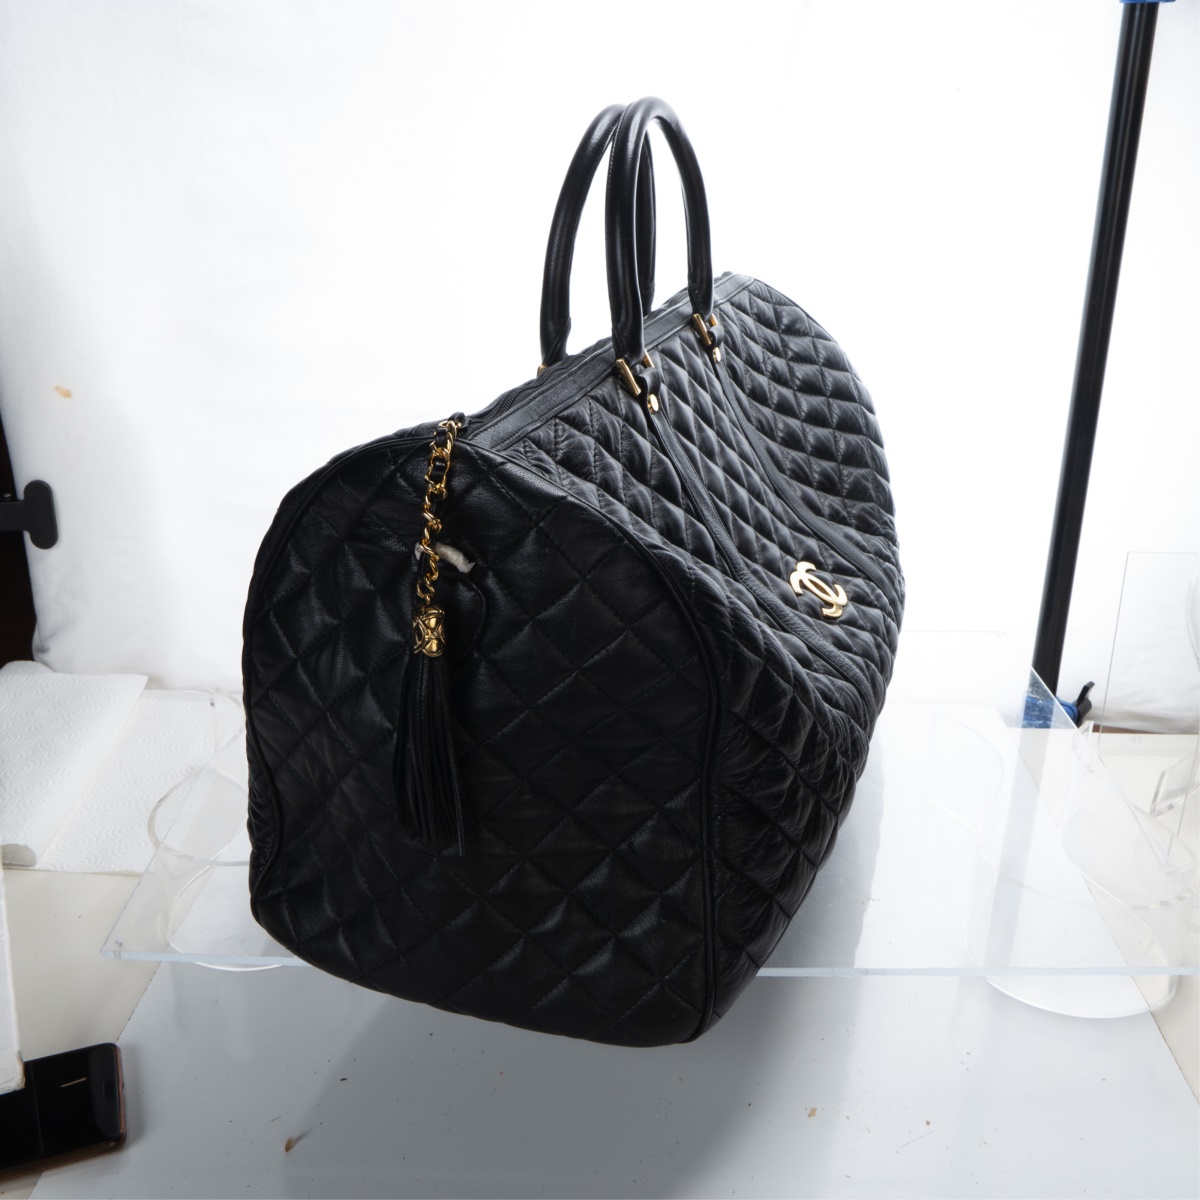 CHANEL"STYLE" QUILTED LEATHER BAG - Image 2 of 6